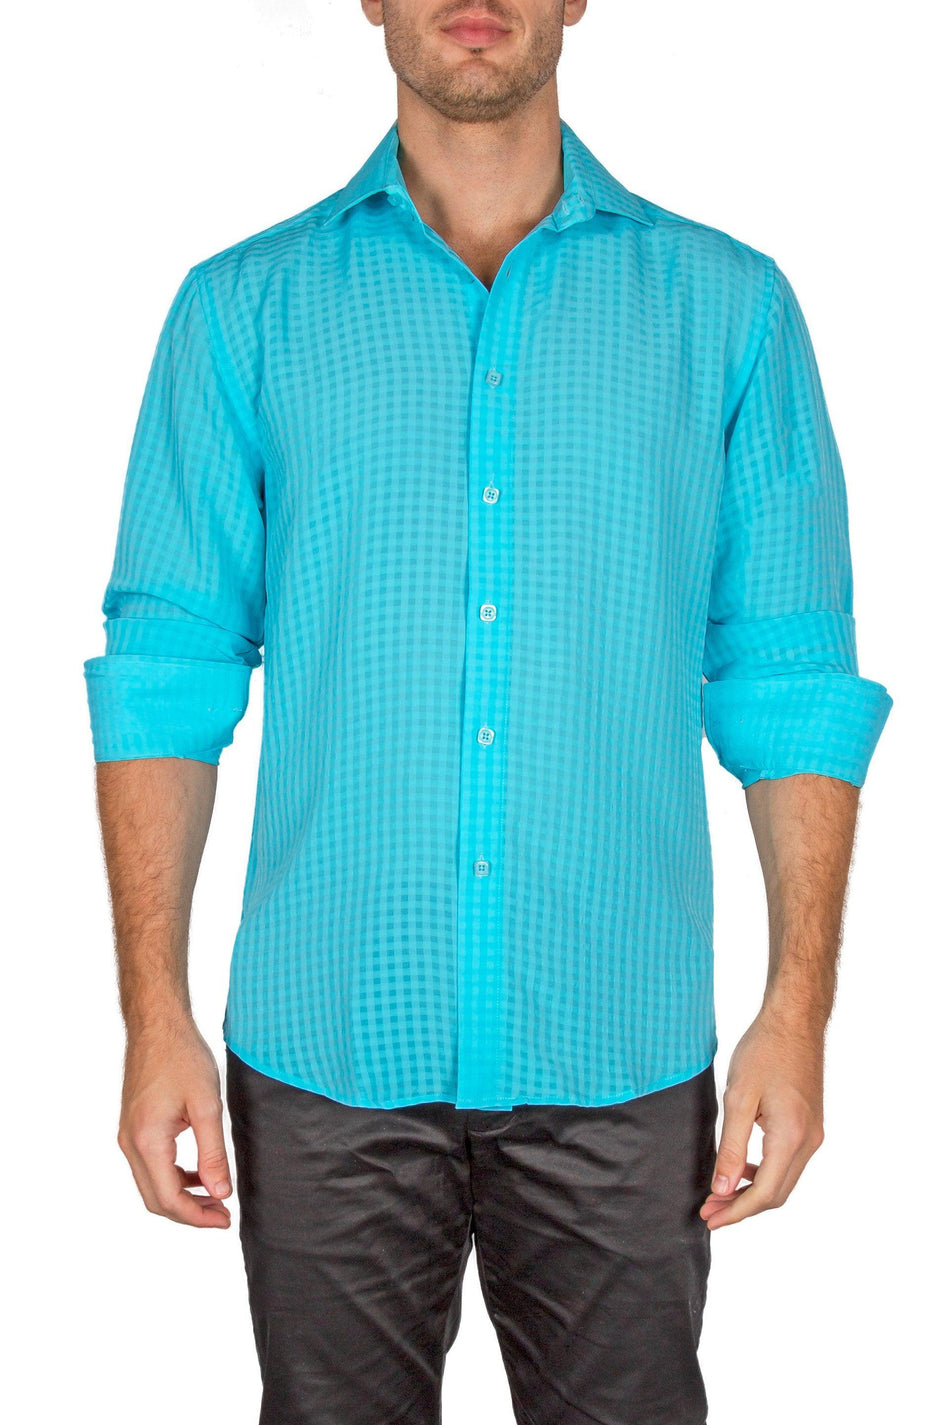 172510-mens-turquoise-button-up-long-sleeve-dress-shirt